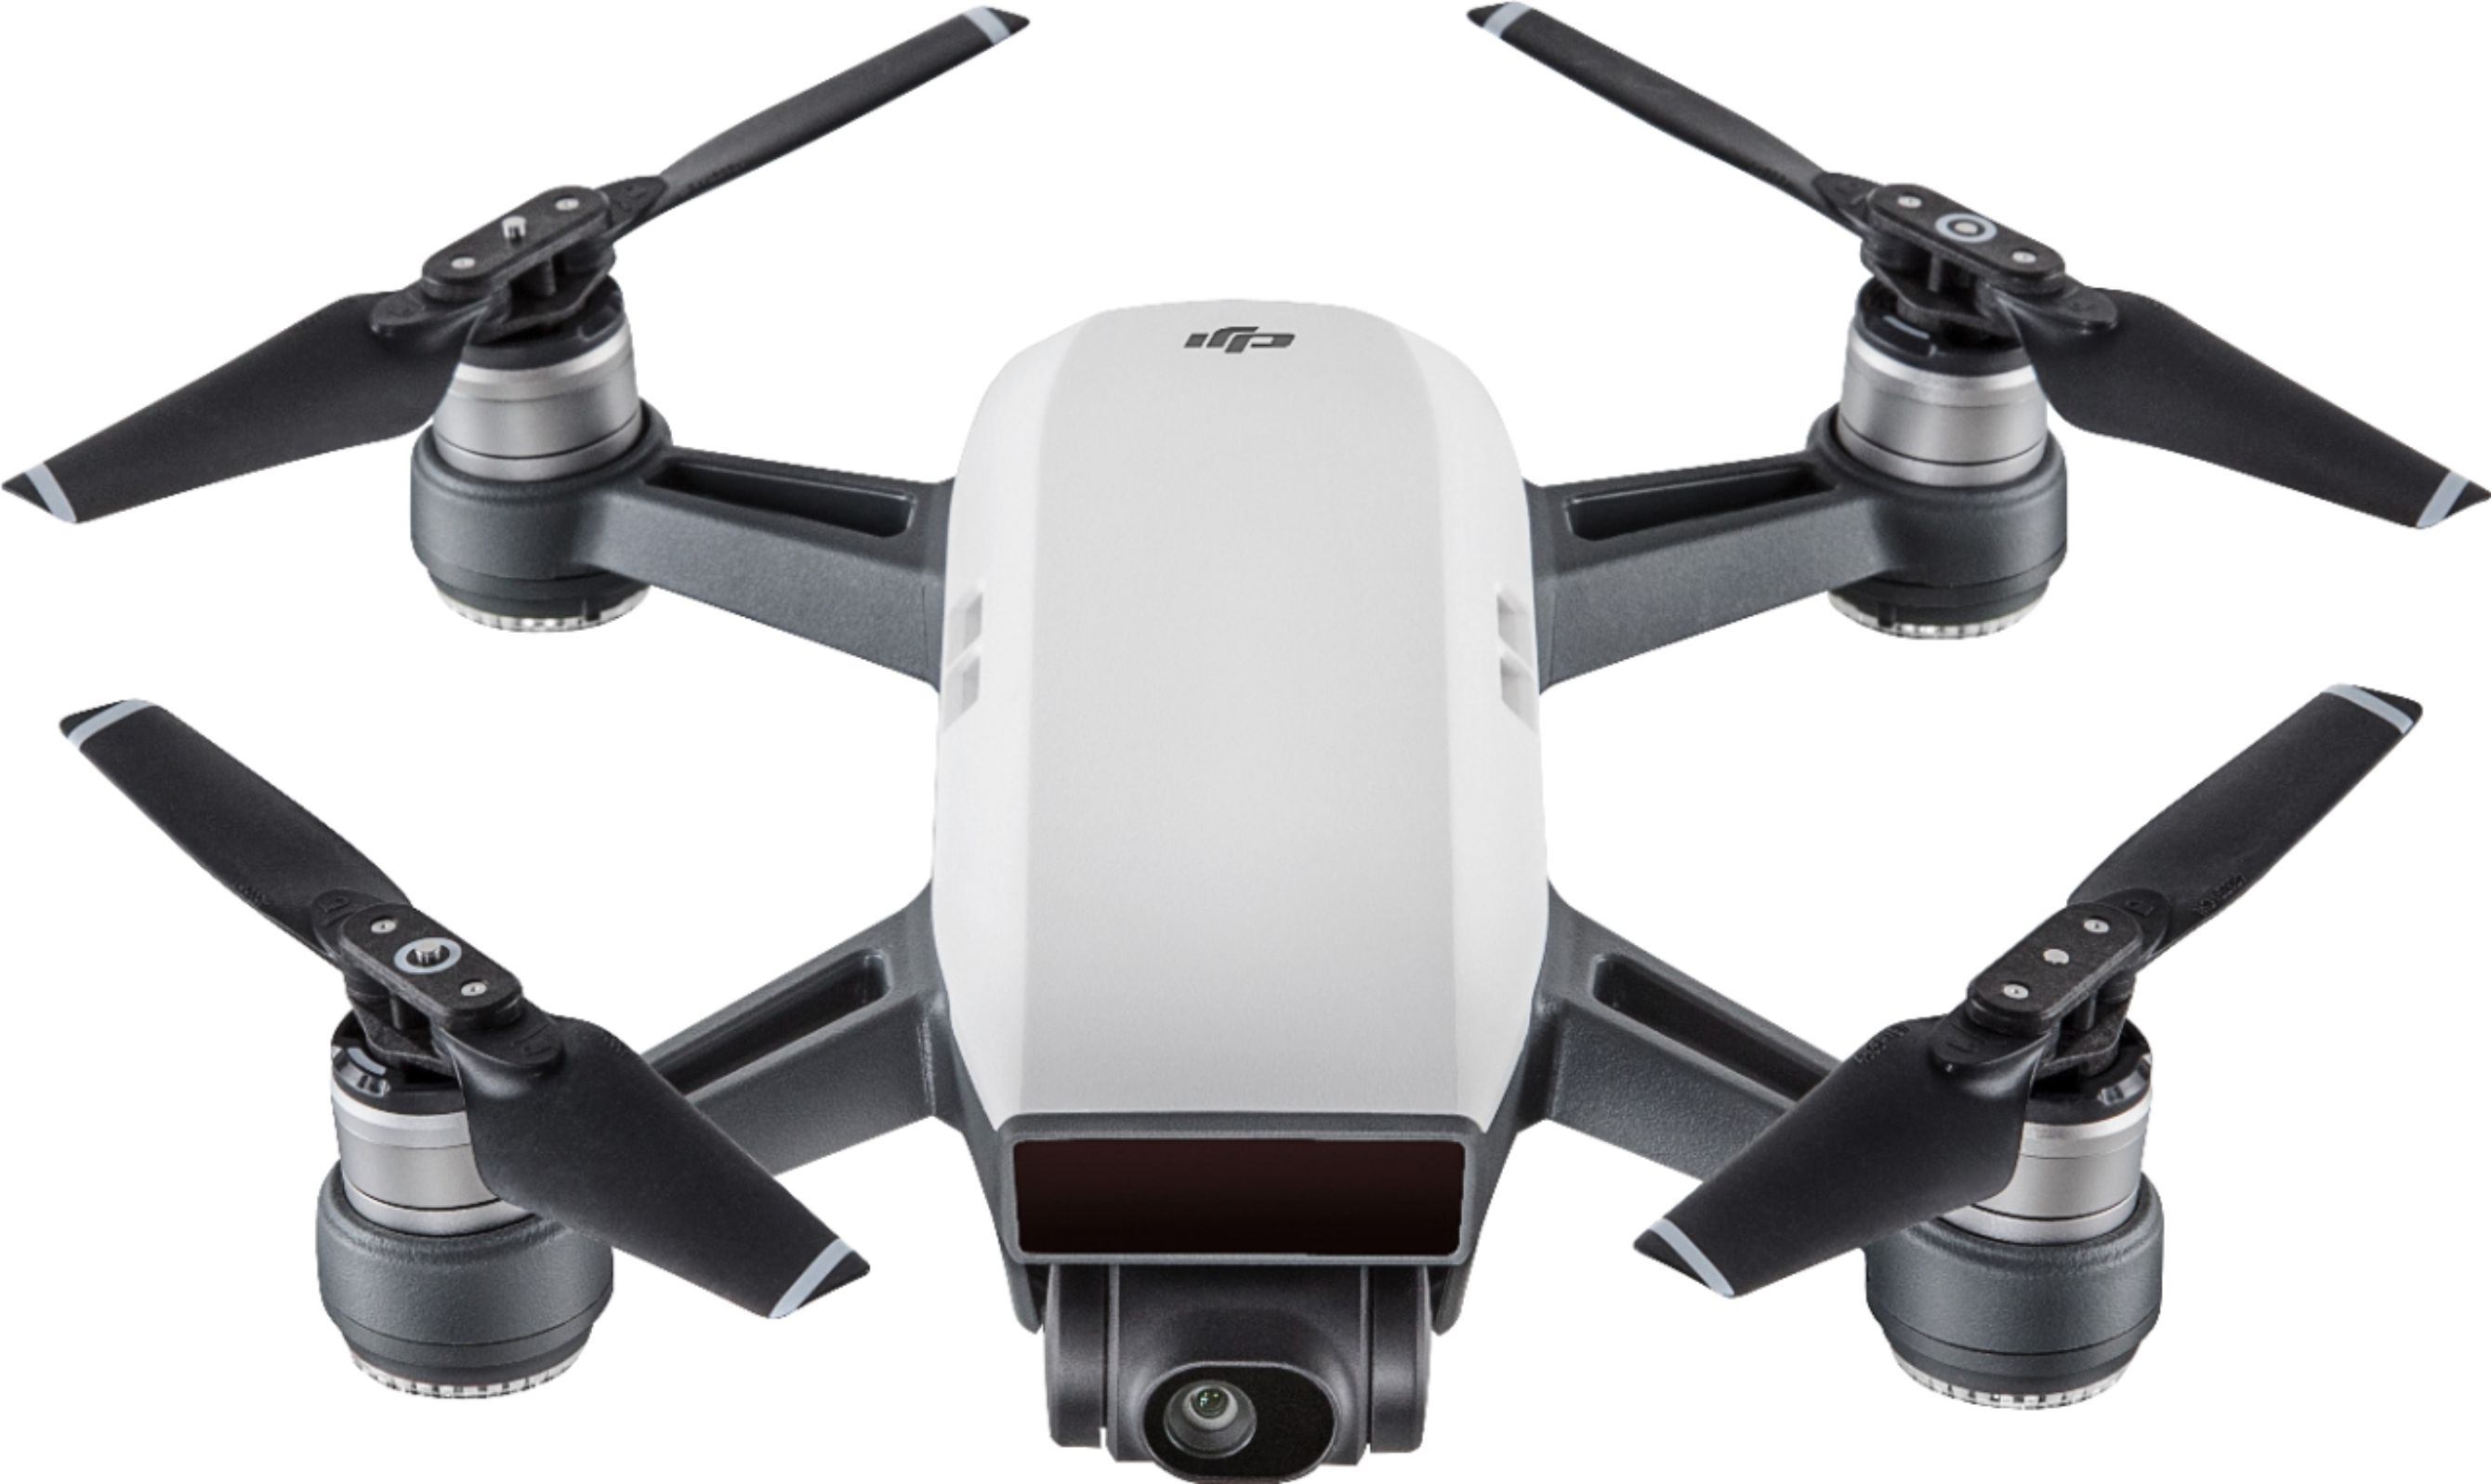 Best Buy: DJI Spark Fly More Combo Quadcopter Alpine White CP.PT